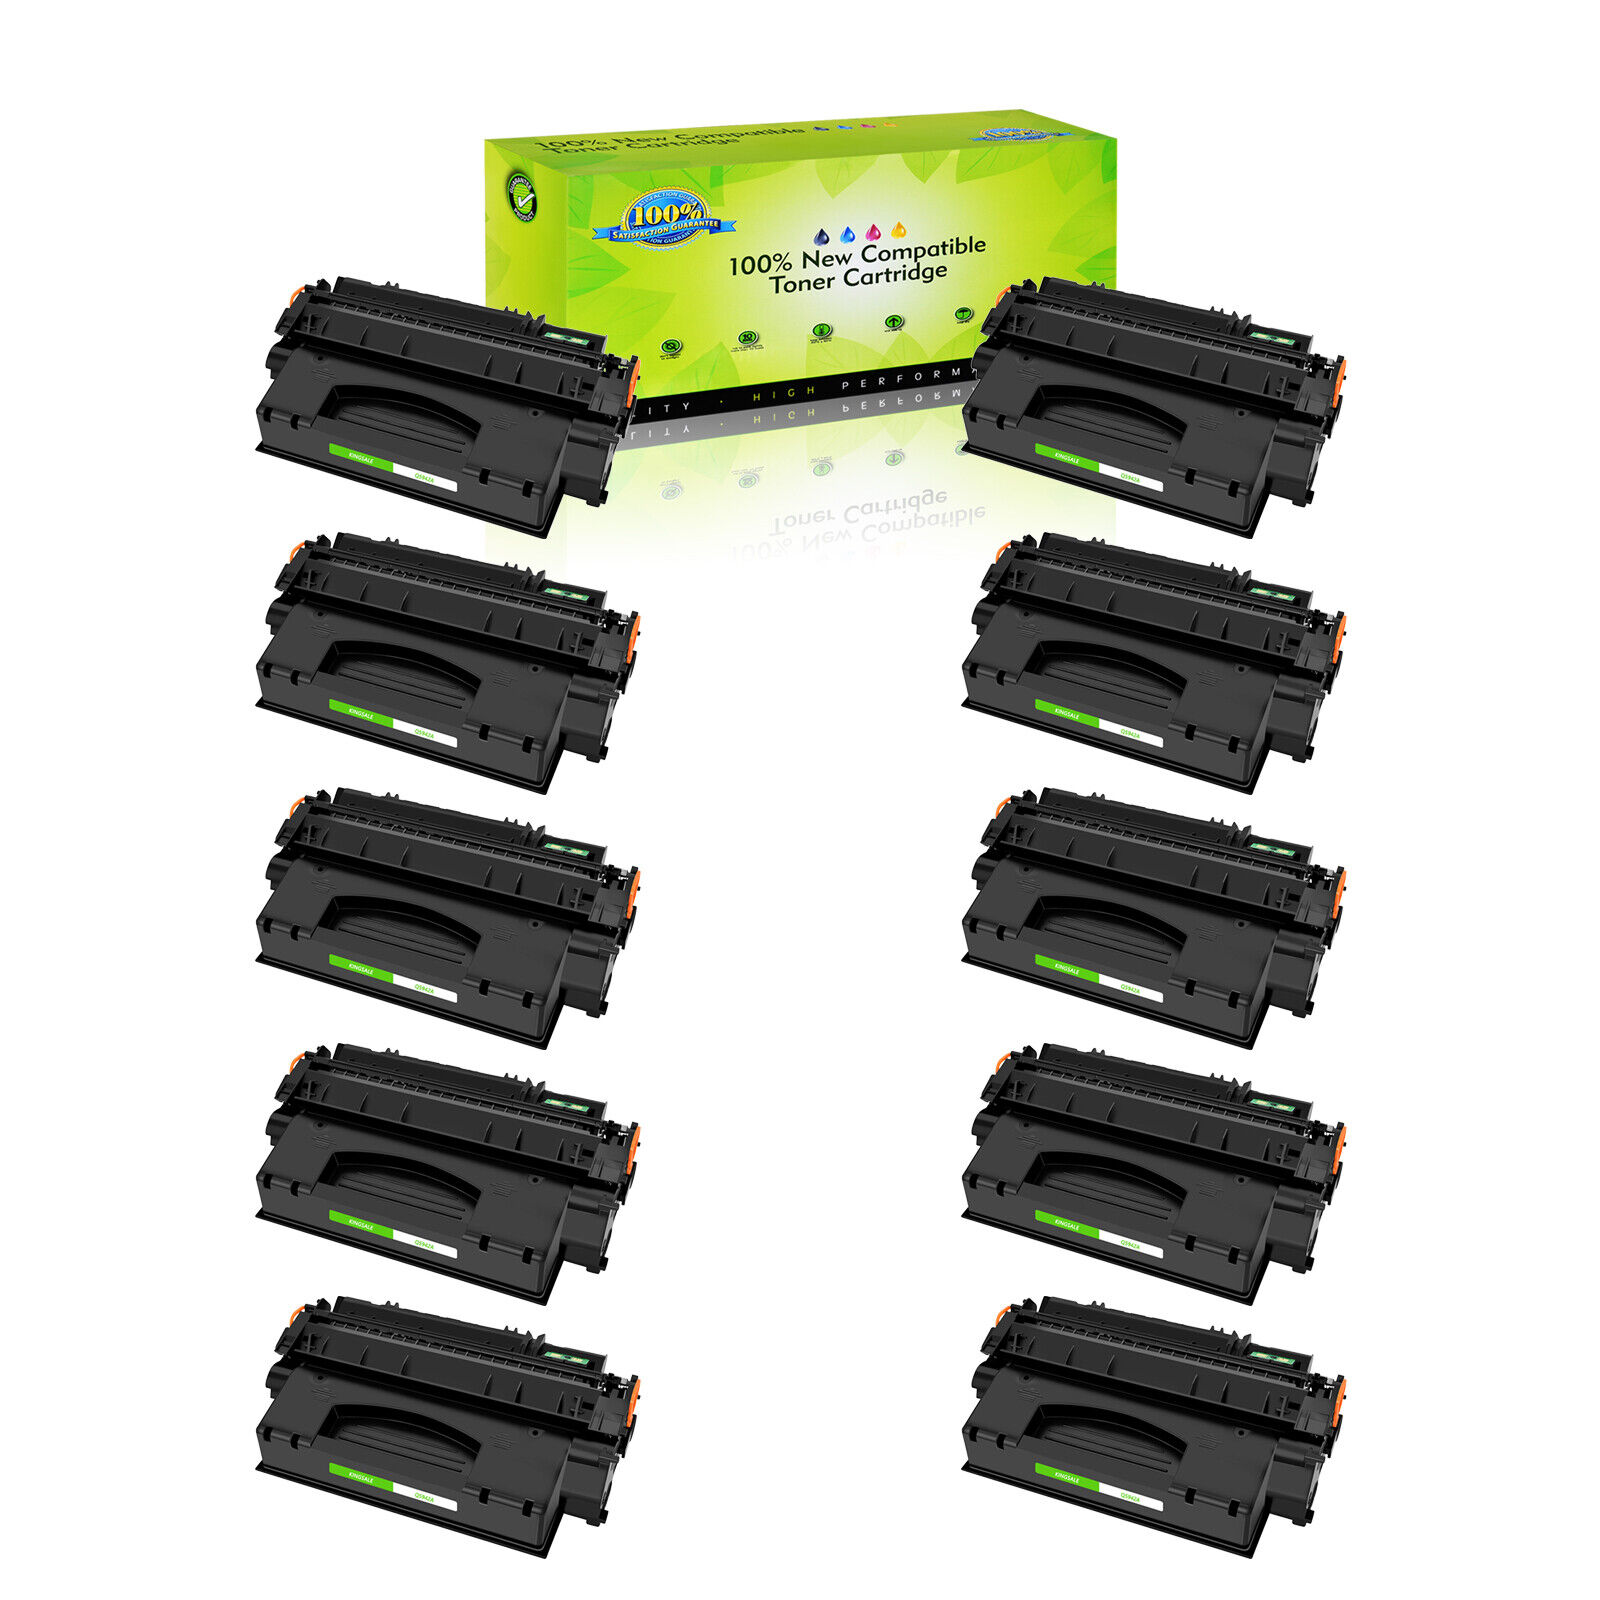 10PK High Yield Q5942A 42A Toner For HP LaserJet 4250 4250dtn 4250Dtnsl 4250n